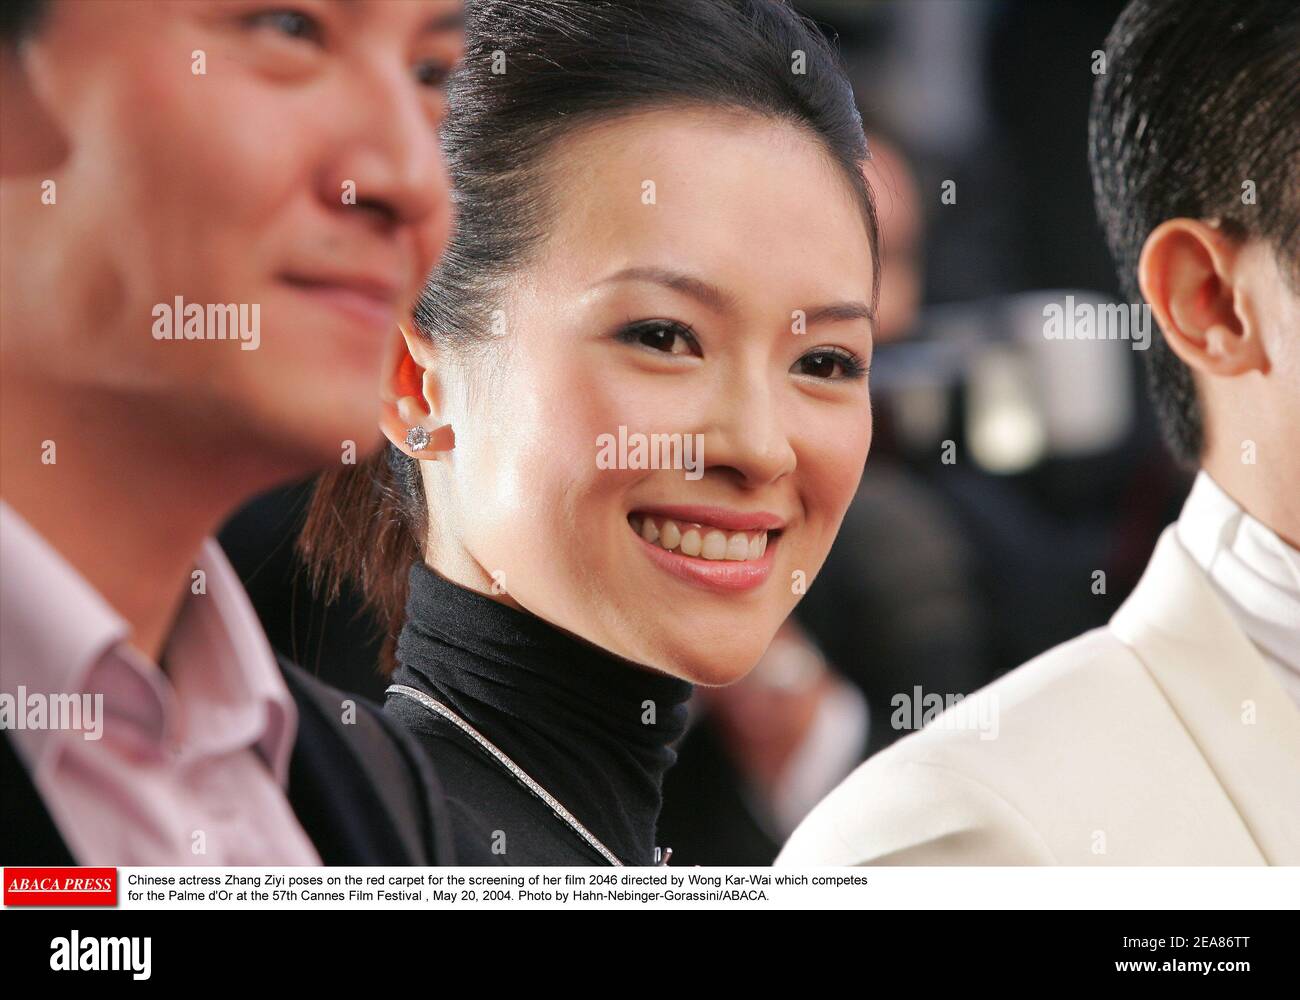 Chinese actress Zhang Ziyi poses on the red carpet for the screening of her film 2046 directed by Wong Kar-Wai which competes for the Palme d'Or at the 57th Cannes Film Festival , May 20, 2004. Photo by Hahn-Nebinger-Gorassini/ABACA. Stock Photo